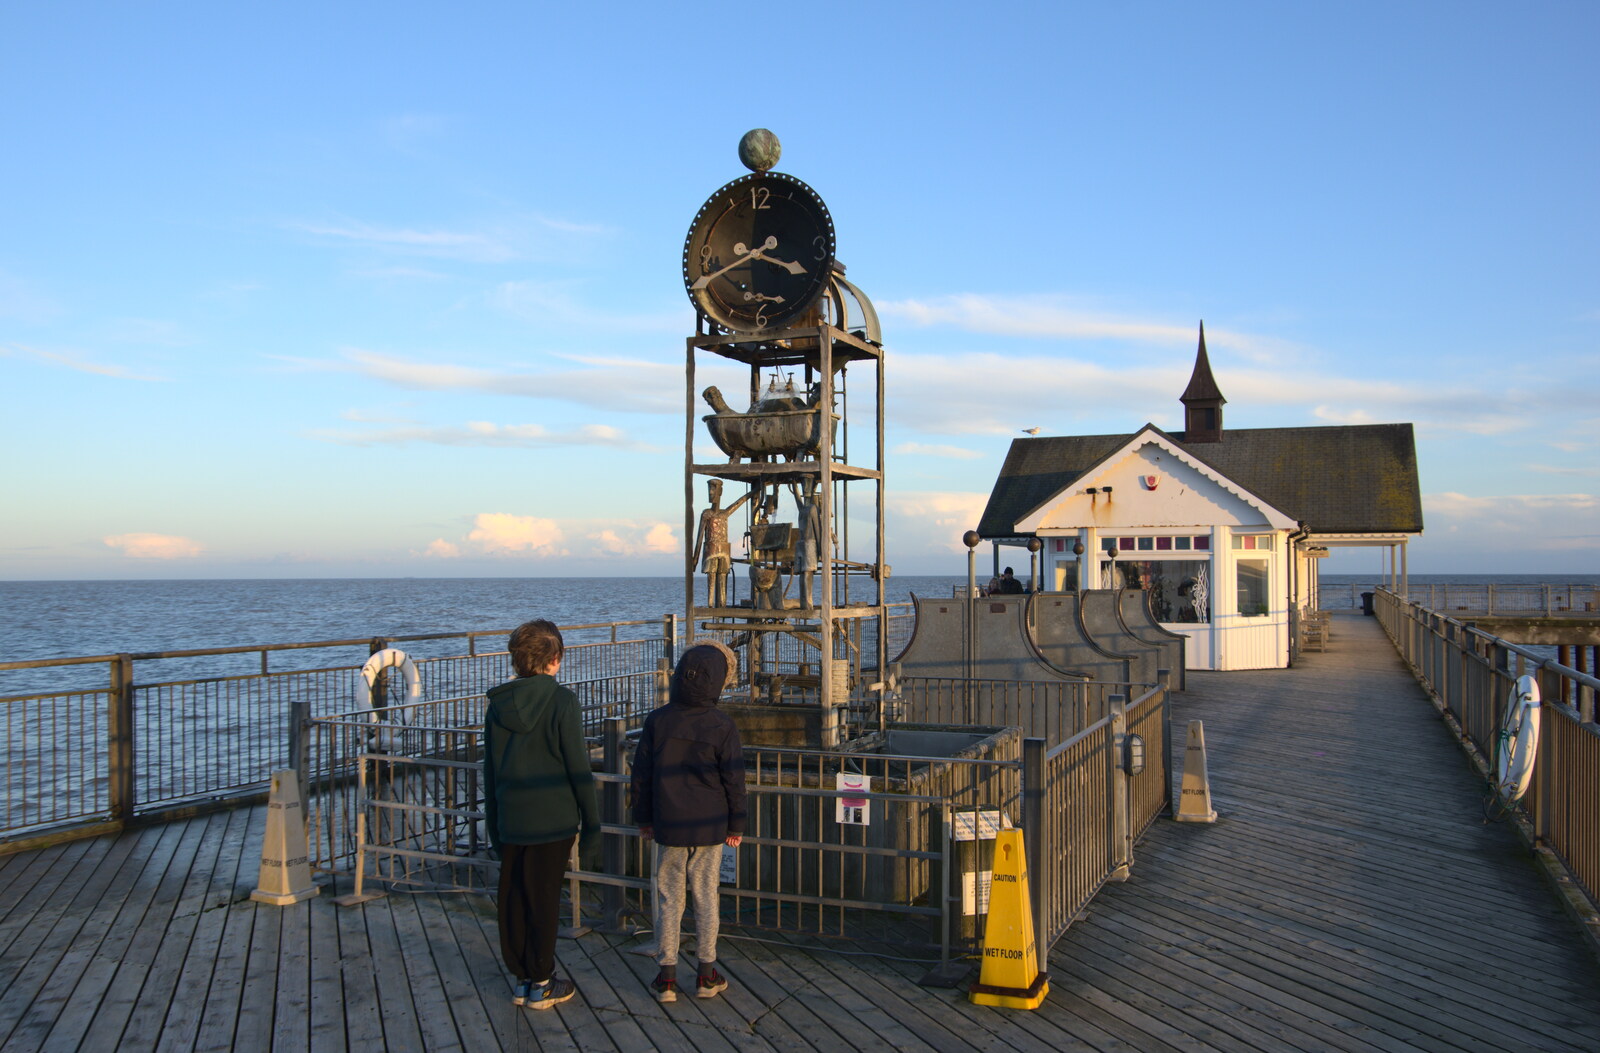 The boys look at Tim Hunkin's water clock from A Return to the Beach, Southwold, Suffolk - 20th December 2020